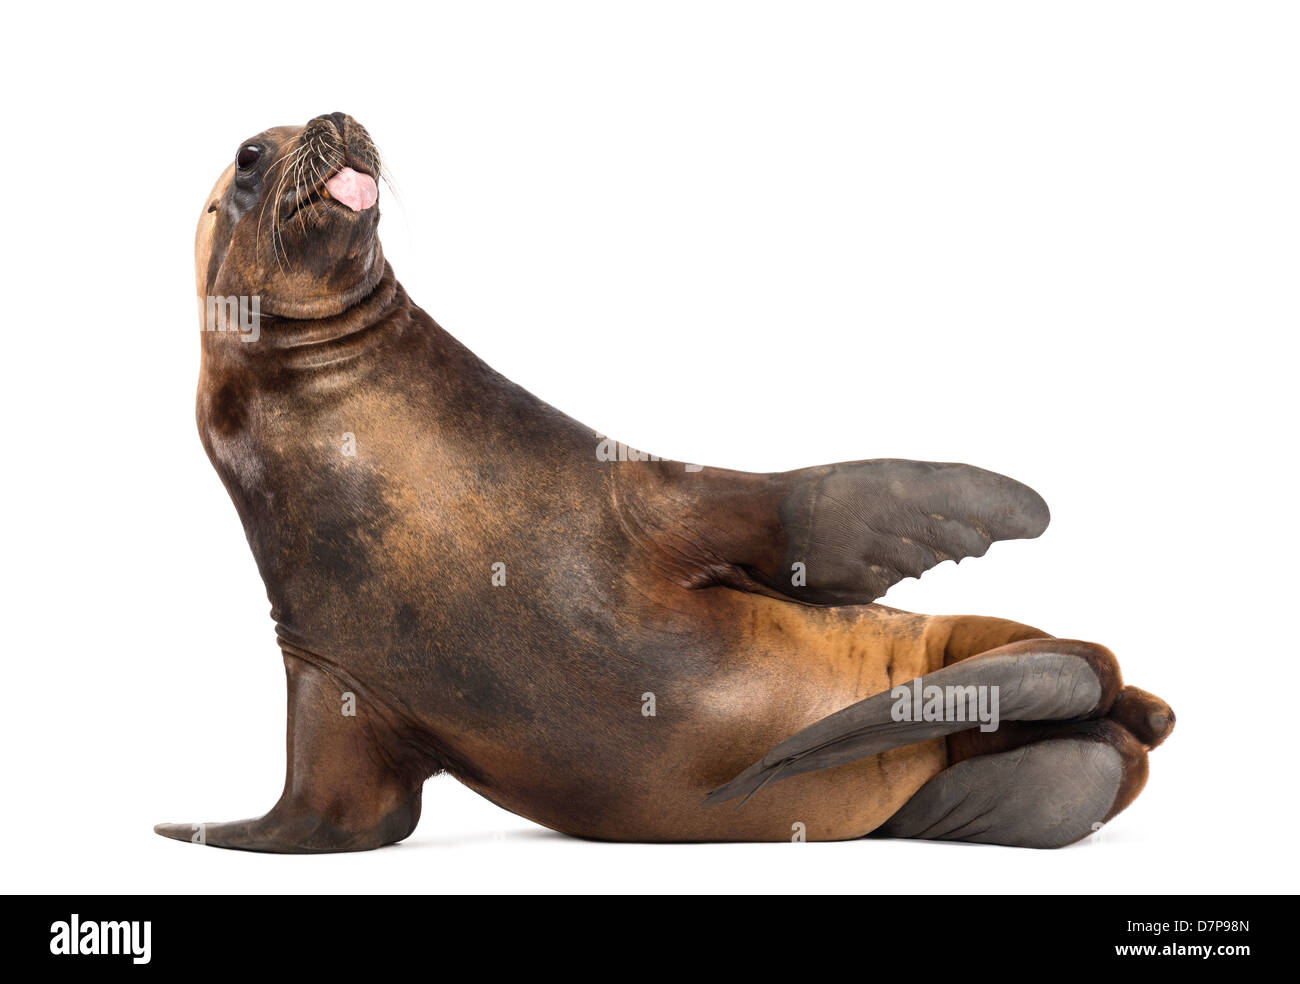 California Sea Lion, Zalophus californianus, 17 years old, lying and sticking out its tongue against white background Stock Photo